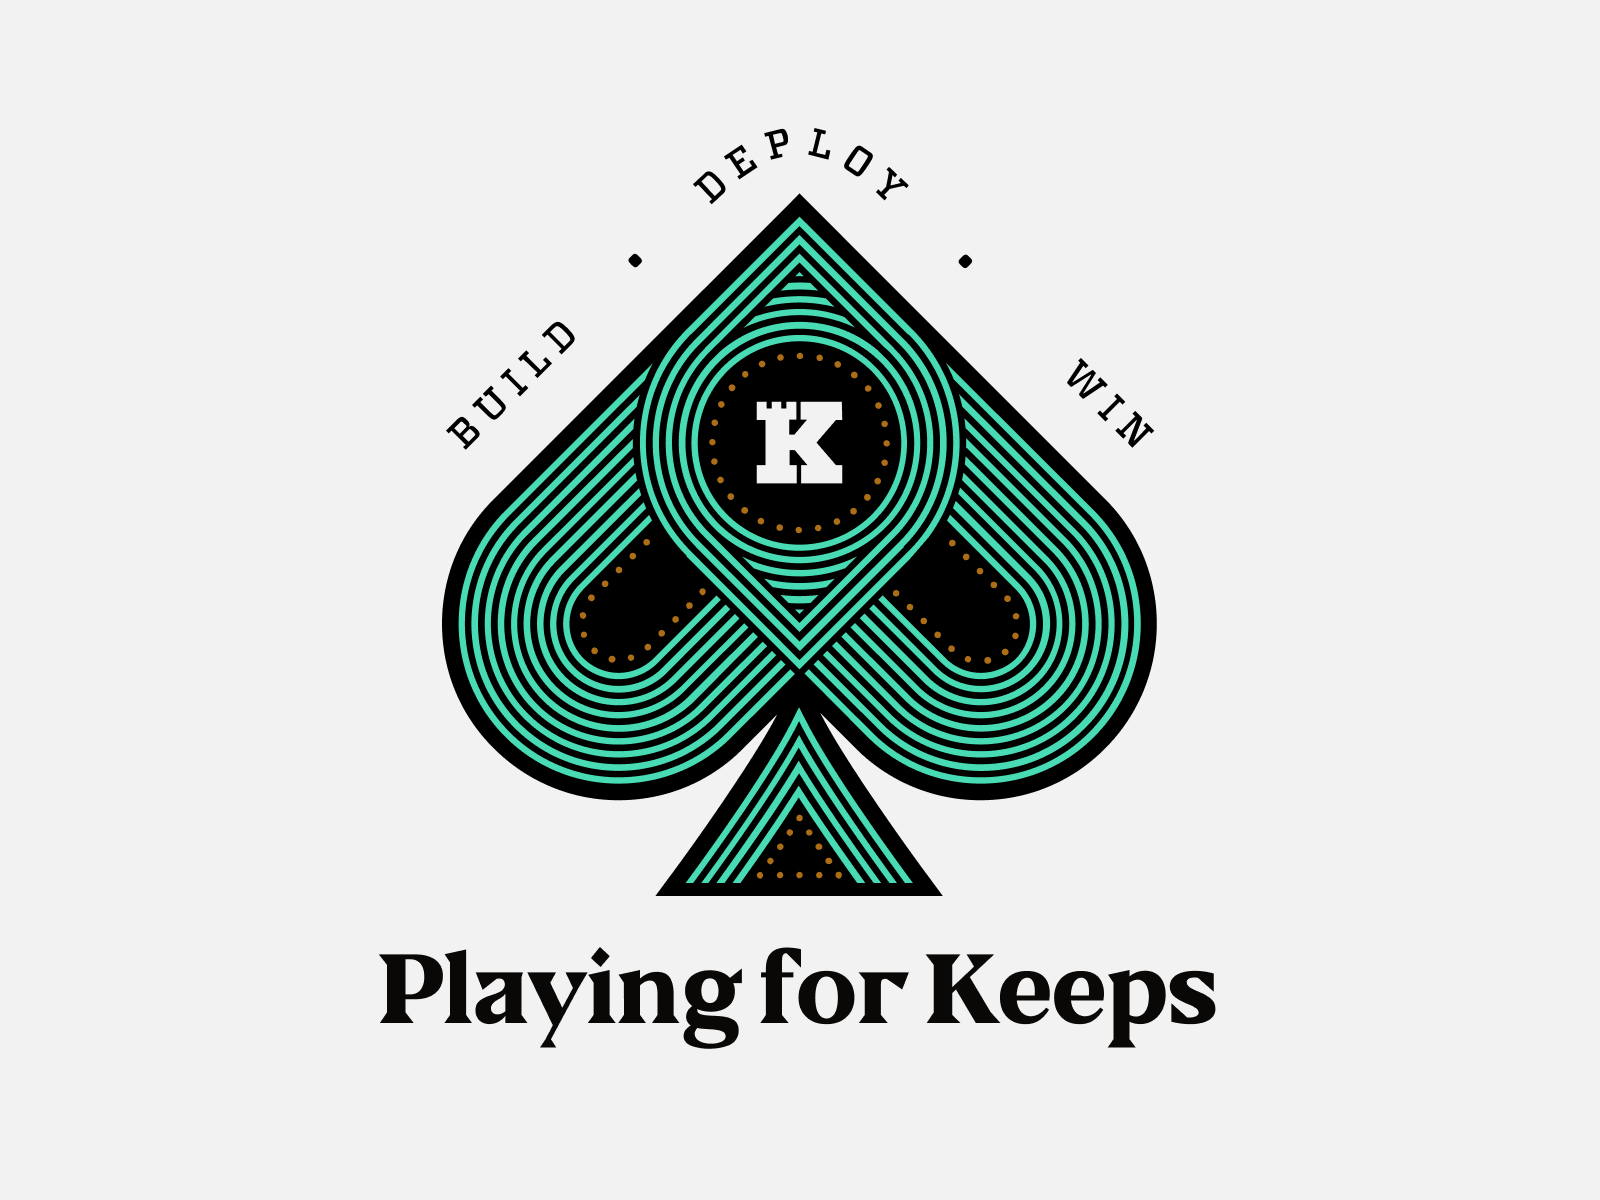 Playing for Keeps by Michael Gluzman for Thesis on Dribbble